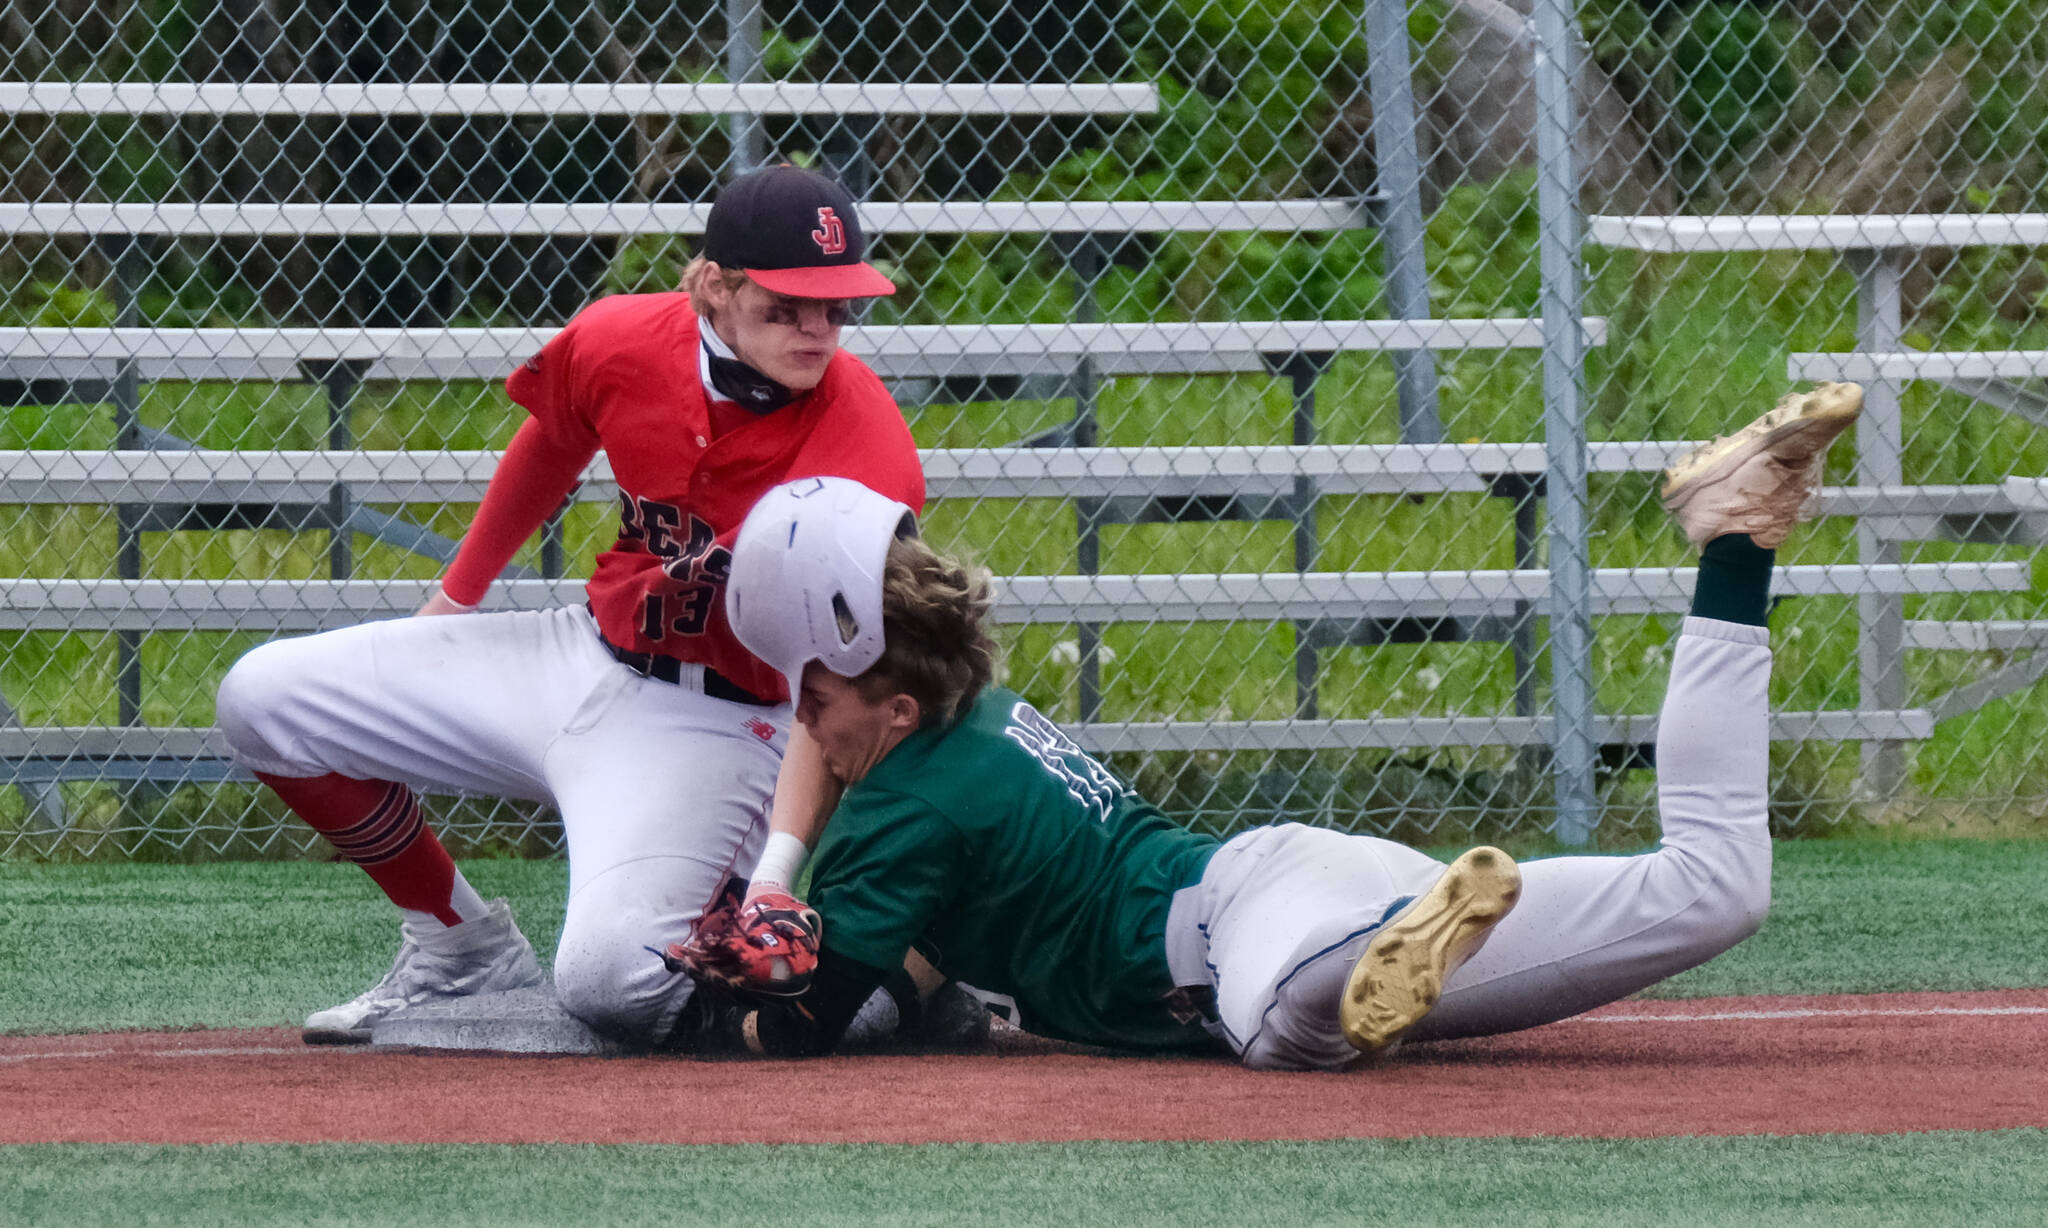 JDHS senior third baseman Kaleb Campbell tags out Colony freshman Kaesen Buzby on a steal attempt during the Crimson Bears 9-1 loss to the Knights on Thursday in the opening round of the ASAA Division I State Baseball Championships at Sitka’s Moller Field. (Klas Stolpe / Juneau Empire)